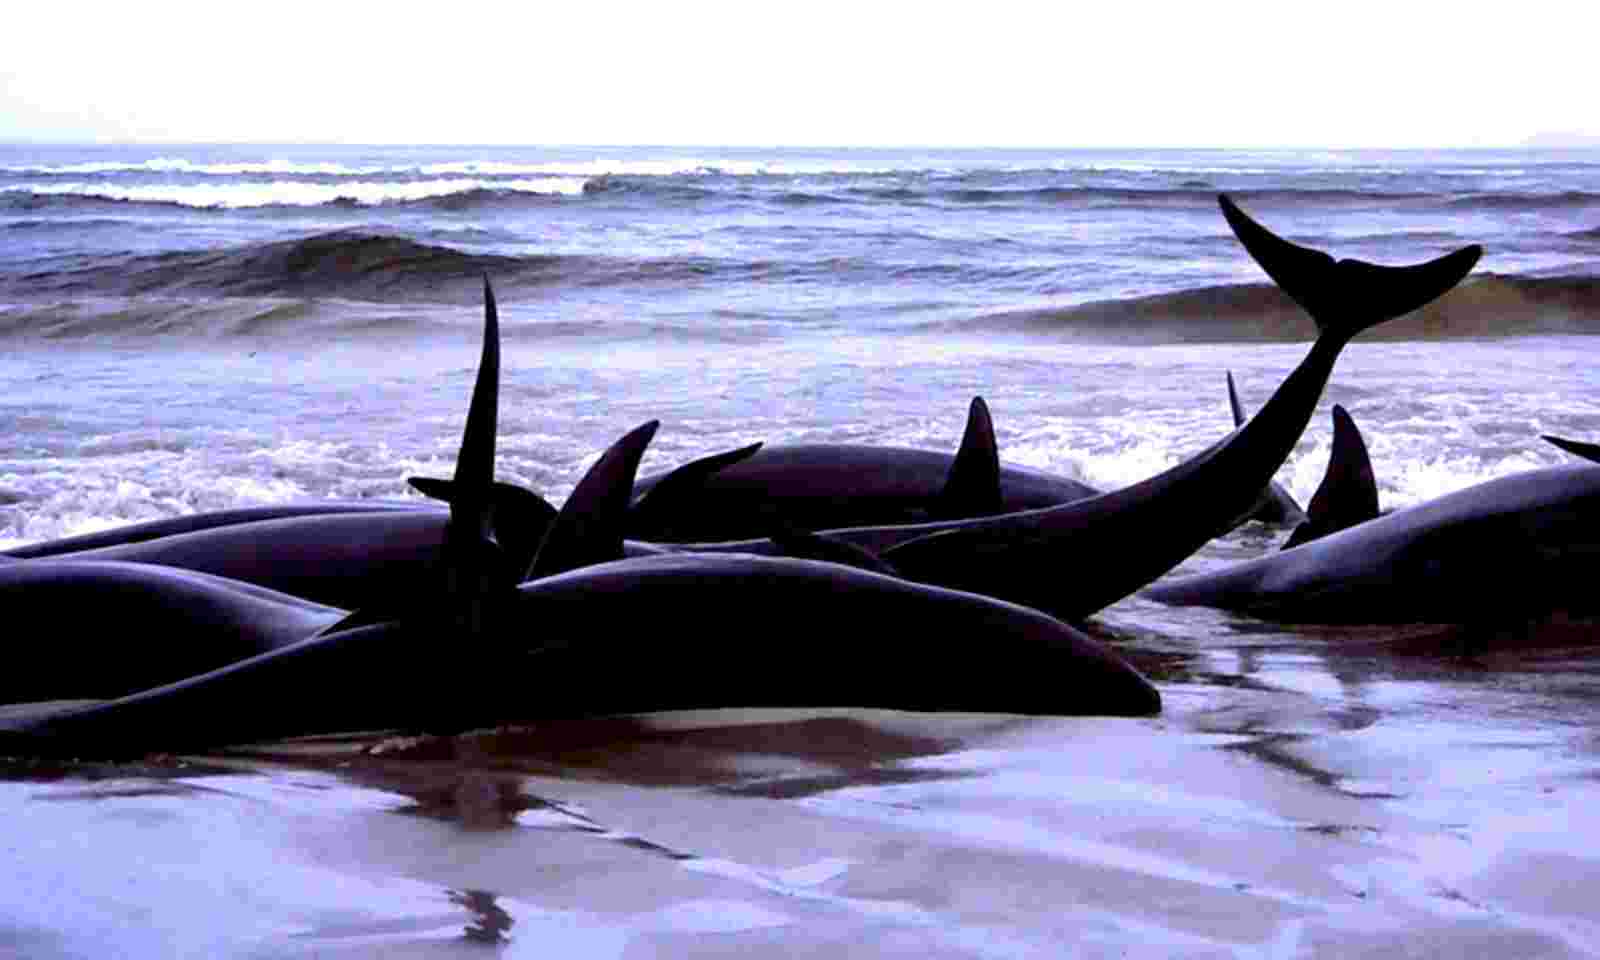 New Zealand: More than 450 whales dead after stranding on islands